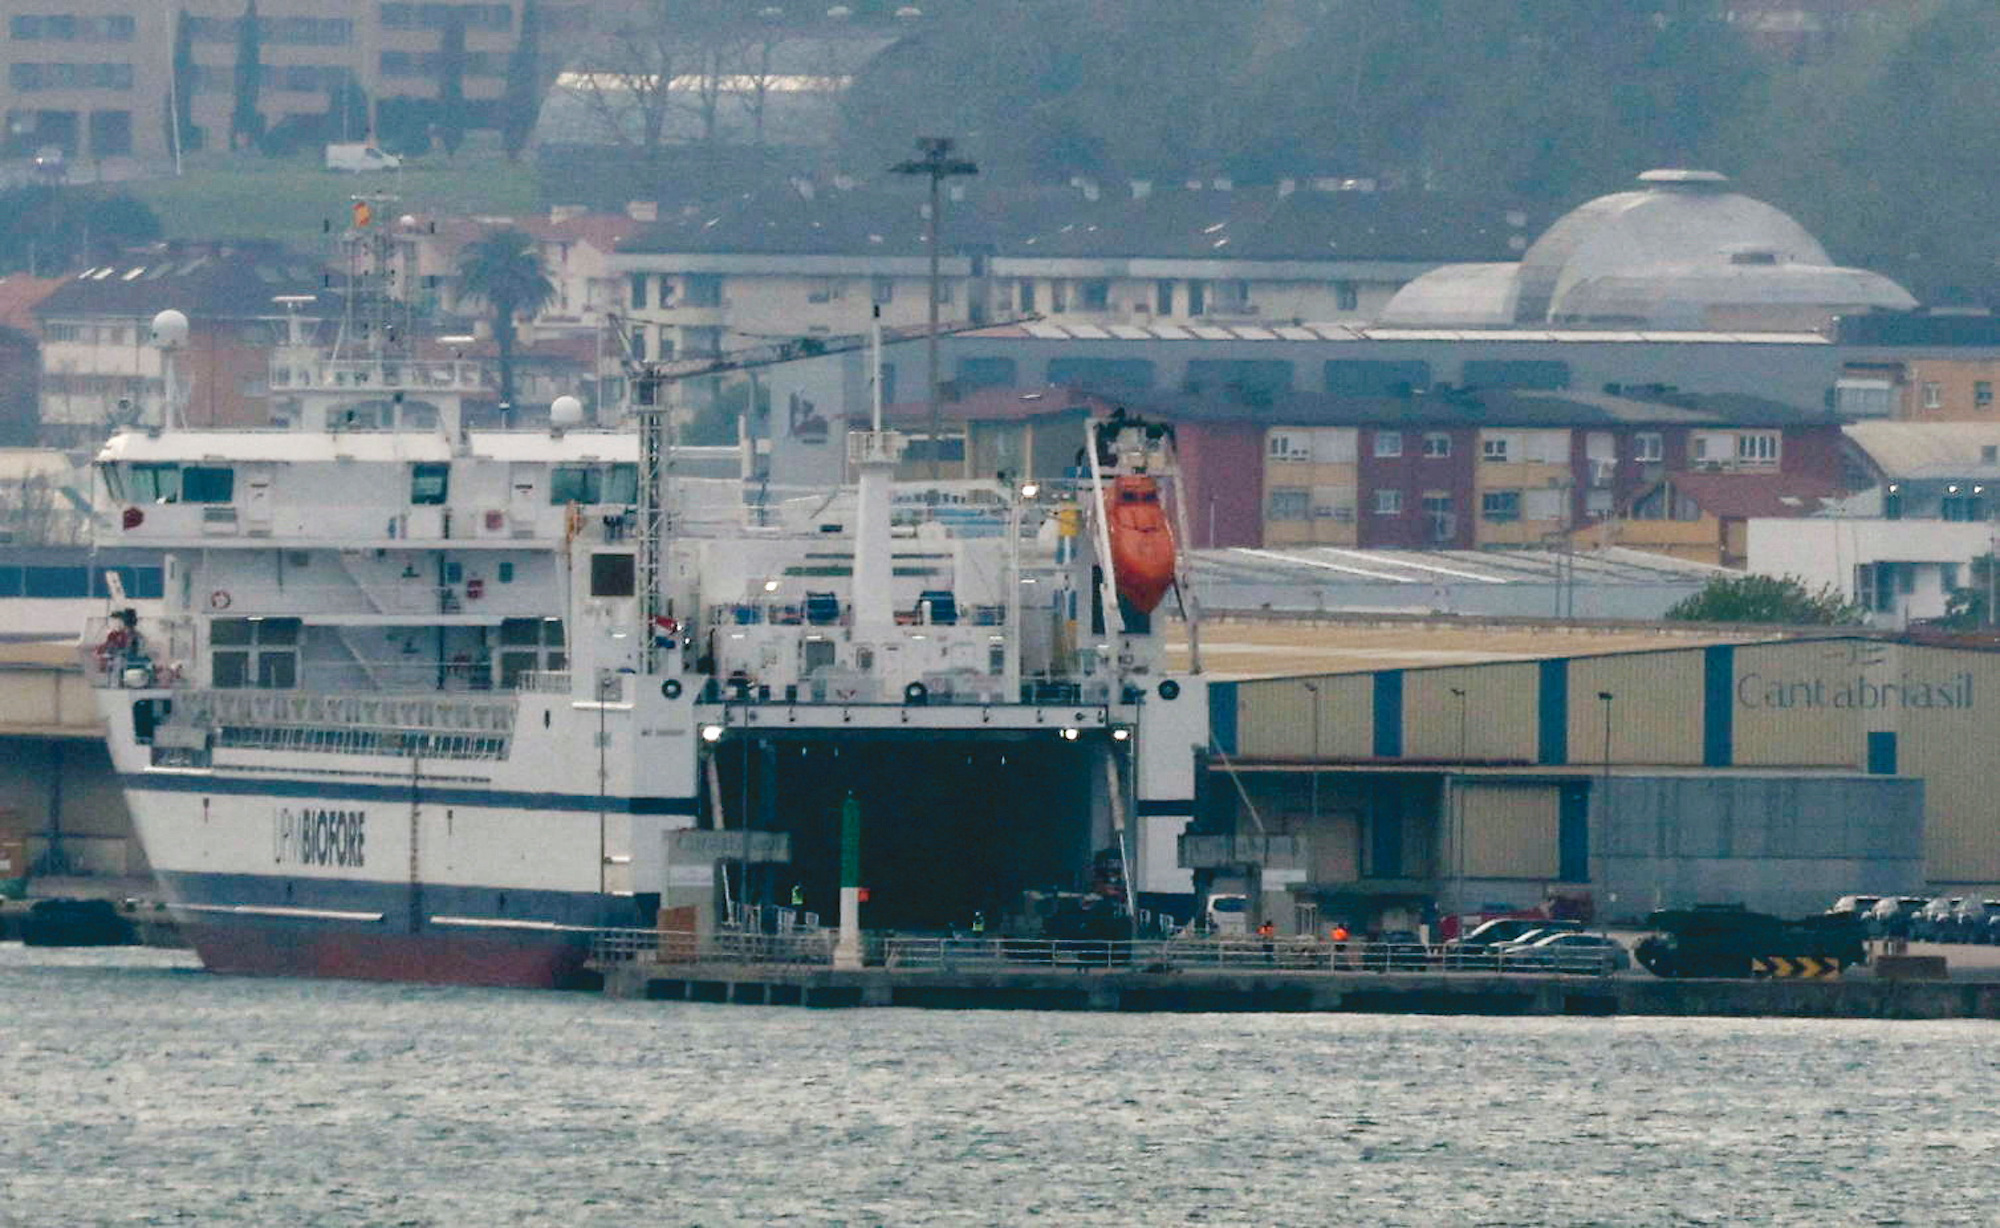 Leopard 2 6A4 tanks being delivered to Ukraine are driven onto a cargo ship in Santander, Spain, on Friday.